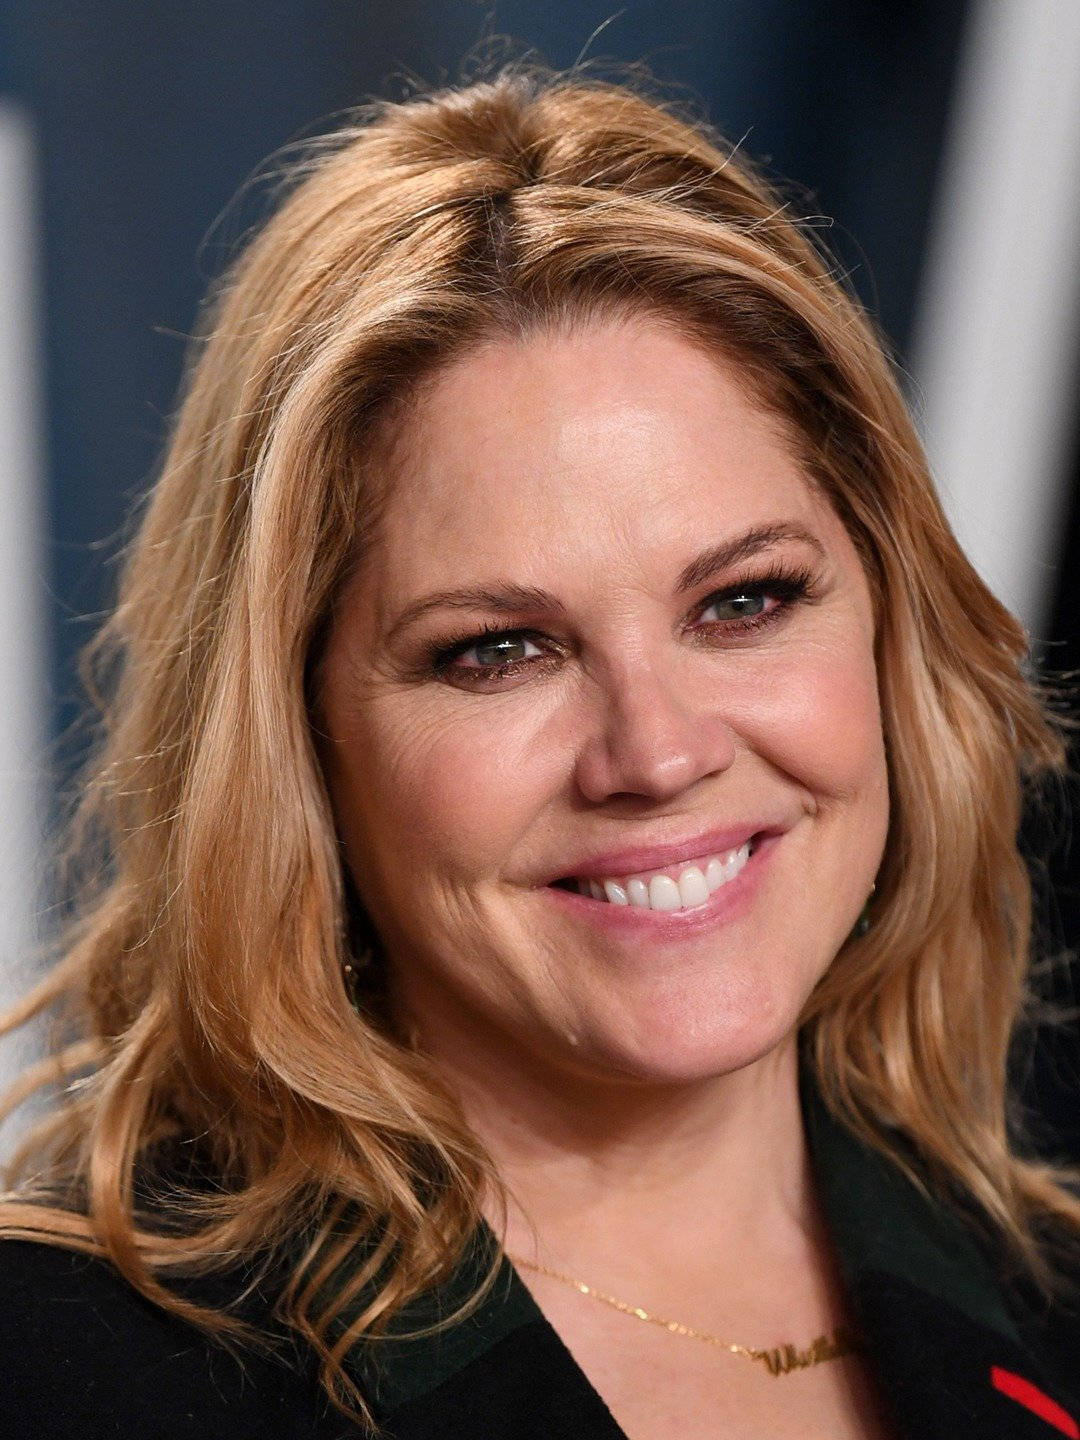 Mary Mccormack At The "Loaded" Premiere Wallpaper